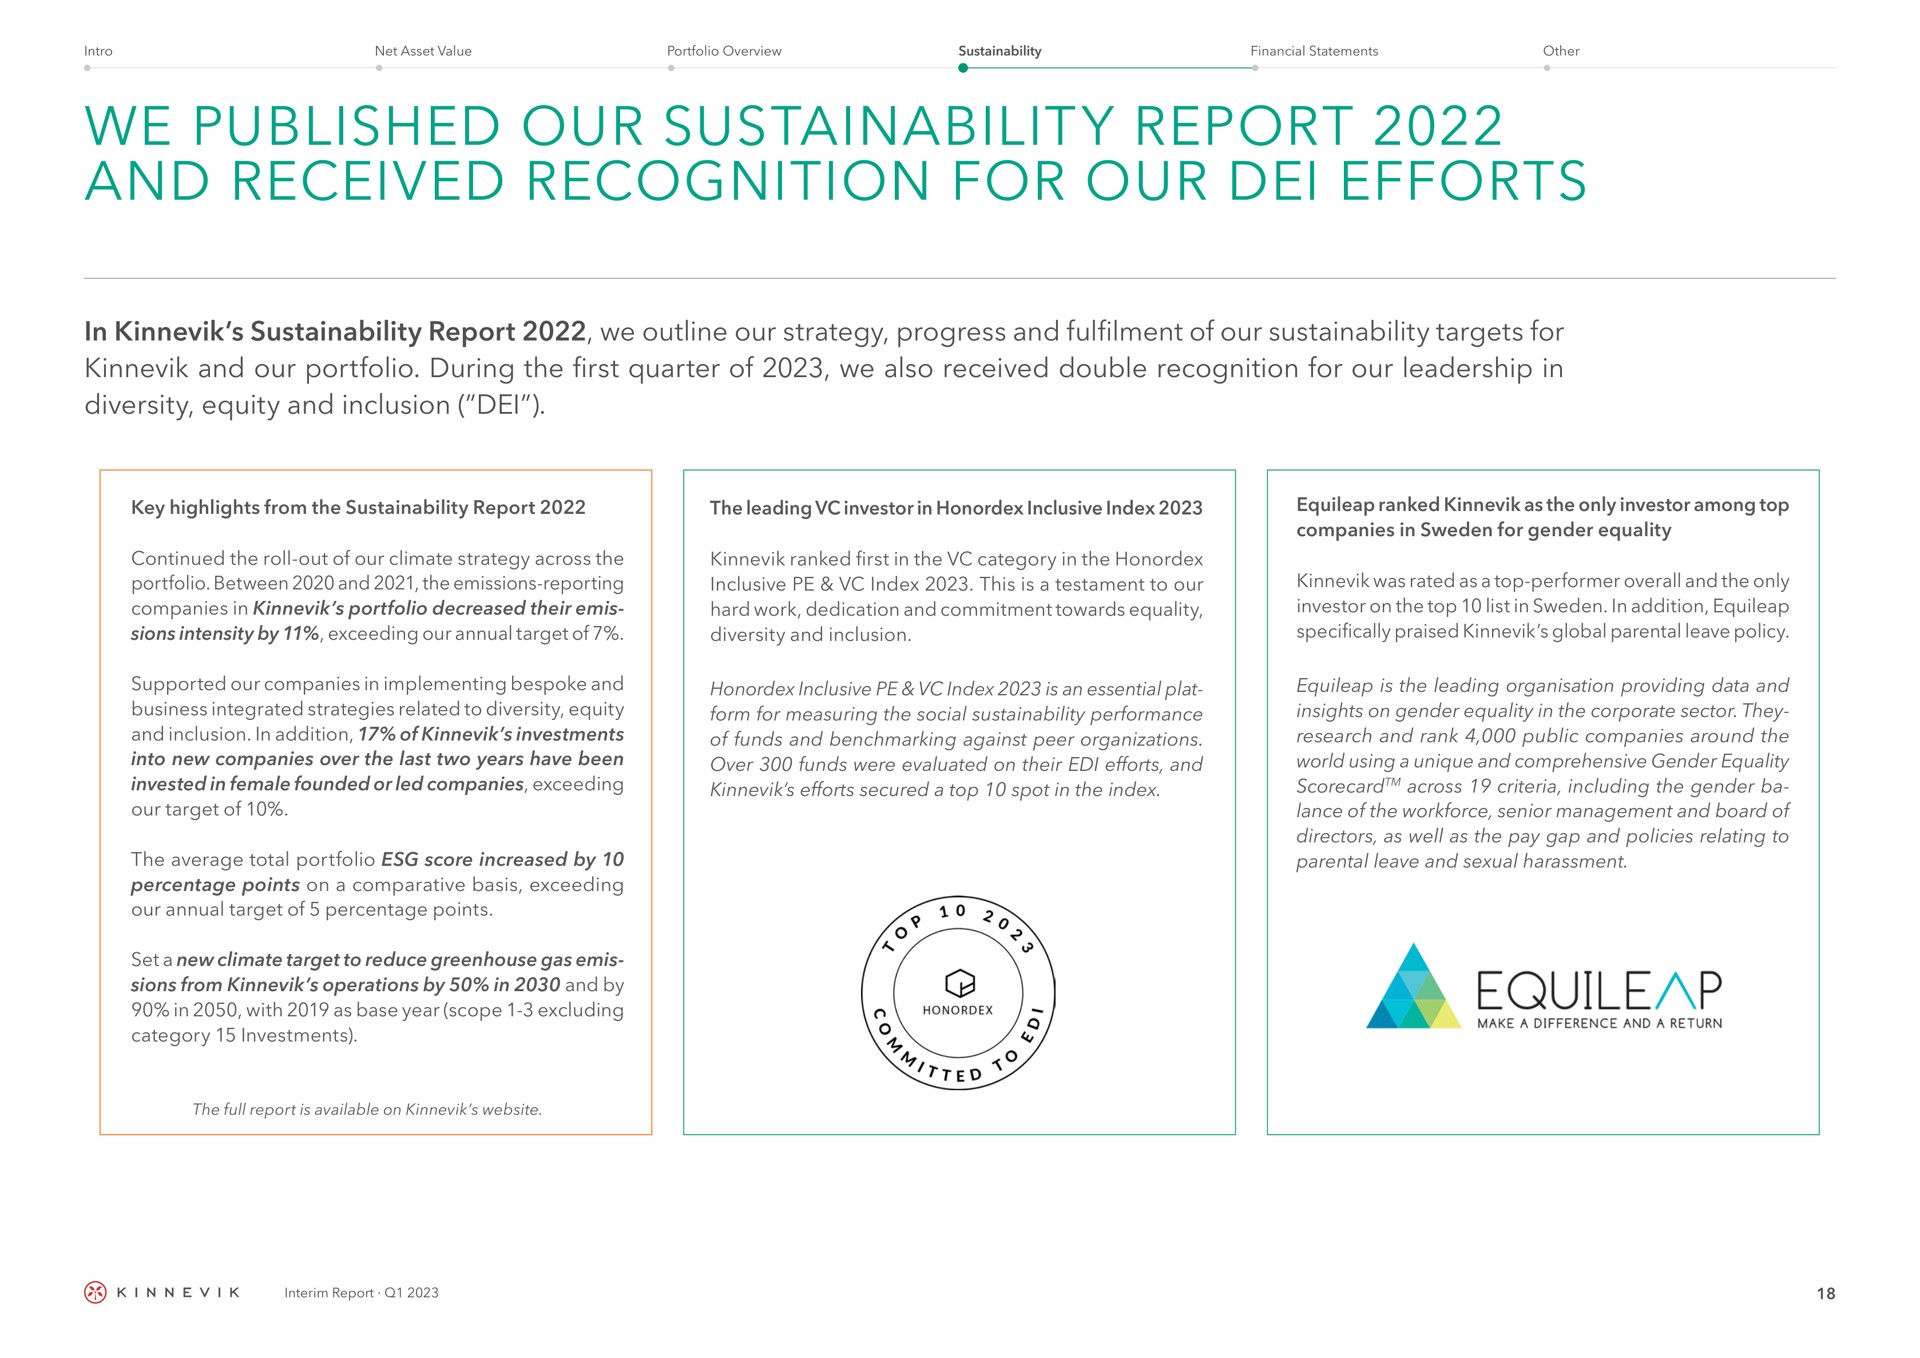 we published our report and received recognition for our efforts in report we outline our strategy progress and of our targets for and our portfolio during the first quarter of we also received double recognition for our leadership in diversity equity and inclusion key highlights from the report the leading investor in inclusive index continued the roll out of our climate strategy across the portfolio between and the emissions reporting companies in portfolio decreased their sions intensity by exceeding our annual target of ranked first in the category in the inclusive index this is a testament to our hard work dedication and commitment towards equality diversity and inclusion inclusive index is an essential plat form for measuring the social performance of funds and against peer organizations over funds were evaluated on their efforts and efforts secured a top spot in the index supported our companies in implementing bespoke and business integrated strategies related to diversity equity and inclusion in addition of investments into new companies over the last two years have been invested in female founded or led companies exceeding our target of the average total portfolio score increased by percentage points on a comparative basis exceeding our annual target of percentage points set a new climate target to reduce greenhouse gas sions from operations by in and by in with as base year scope excluding category investments ranked as the only investor among top companies in for gender equality was rated as a top performer overall and the only investor on the top list in in addition specifically praised global parental leave policy is the leading providing data and insights on gender equality in the corporate sector they research and rank public companies around the world using a unique and comprehensive gender equality across criteria including the gender lance of the senior management and board of directors as well as the pay gap and policies relating to parental leave and sexual harassment anew | Kinnevik